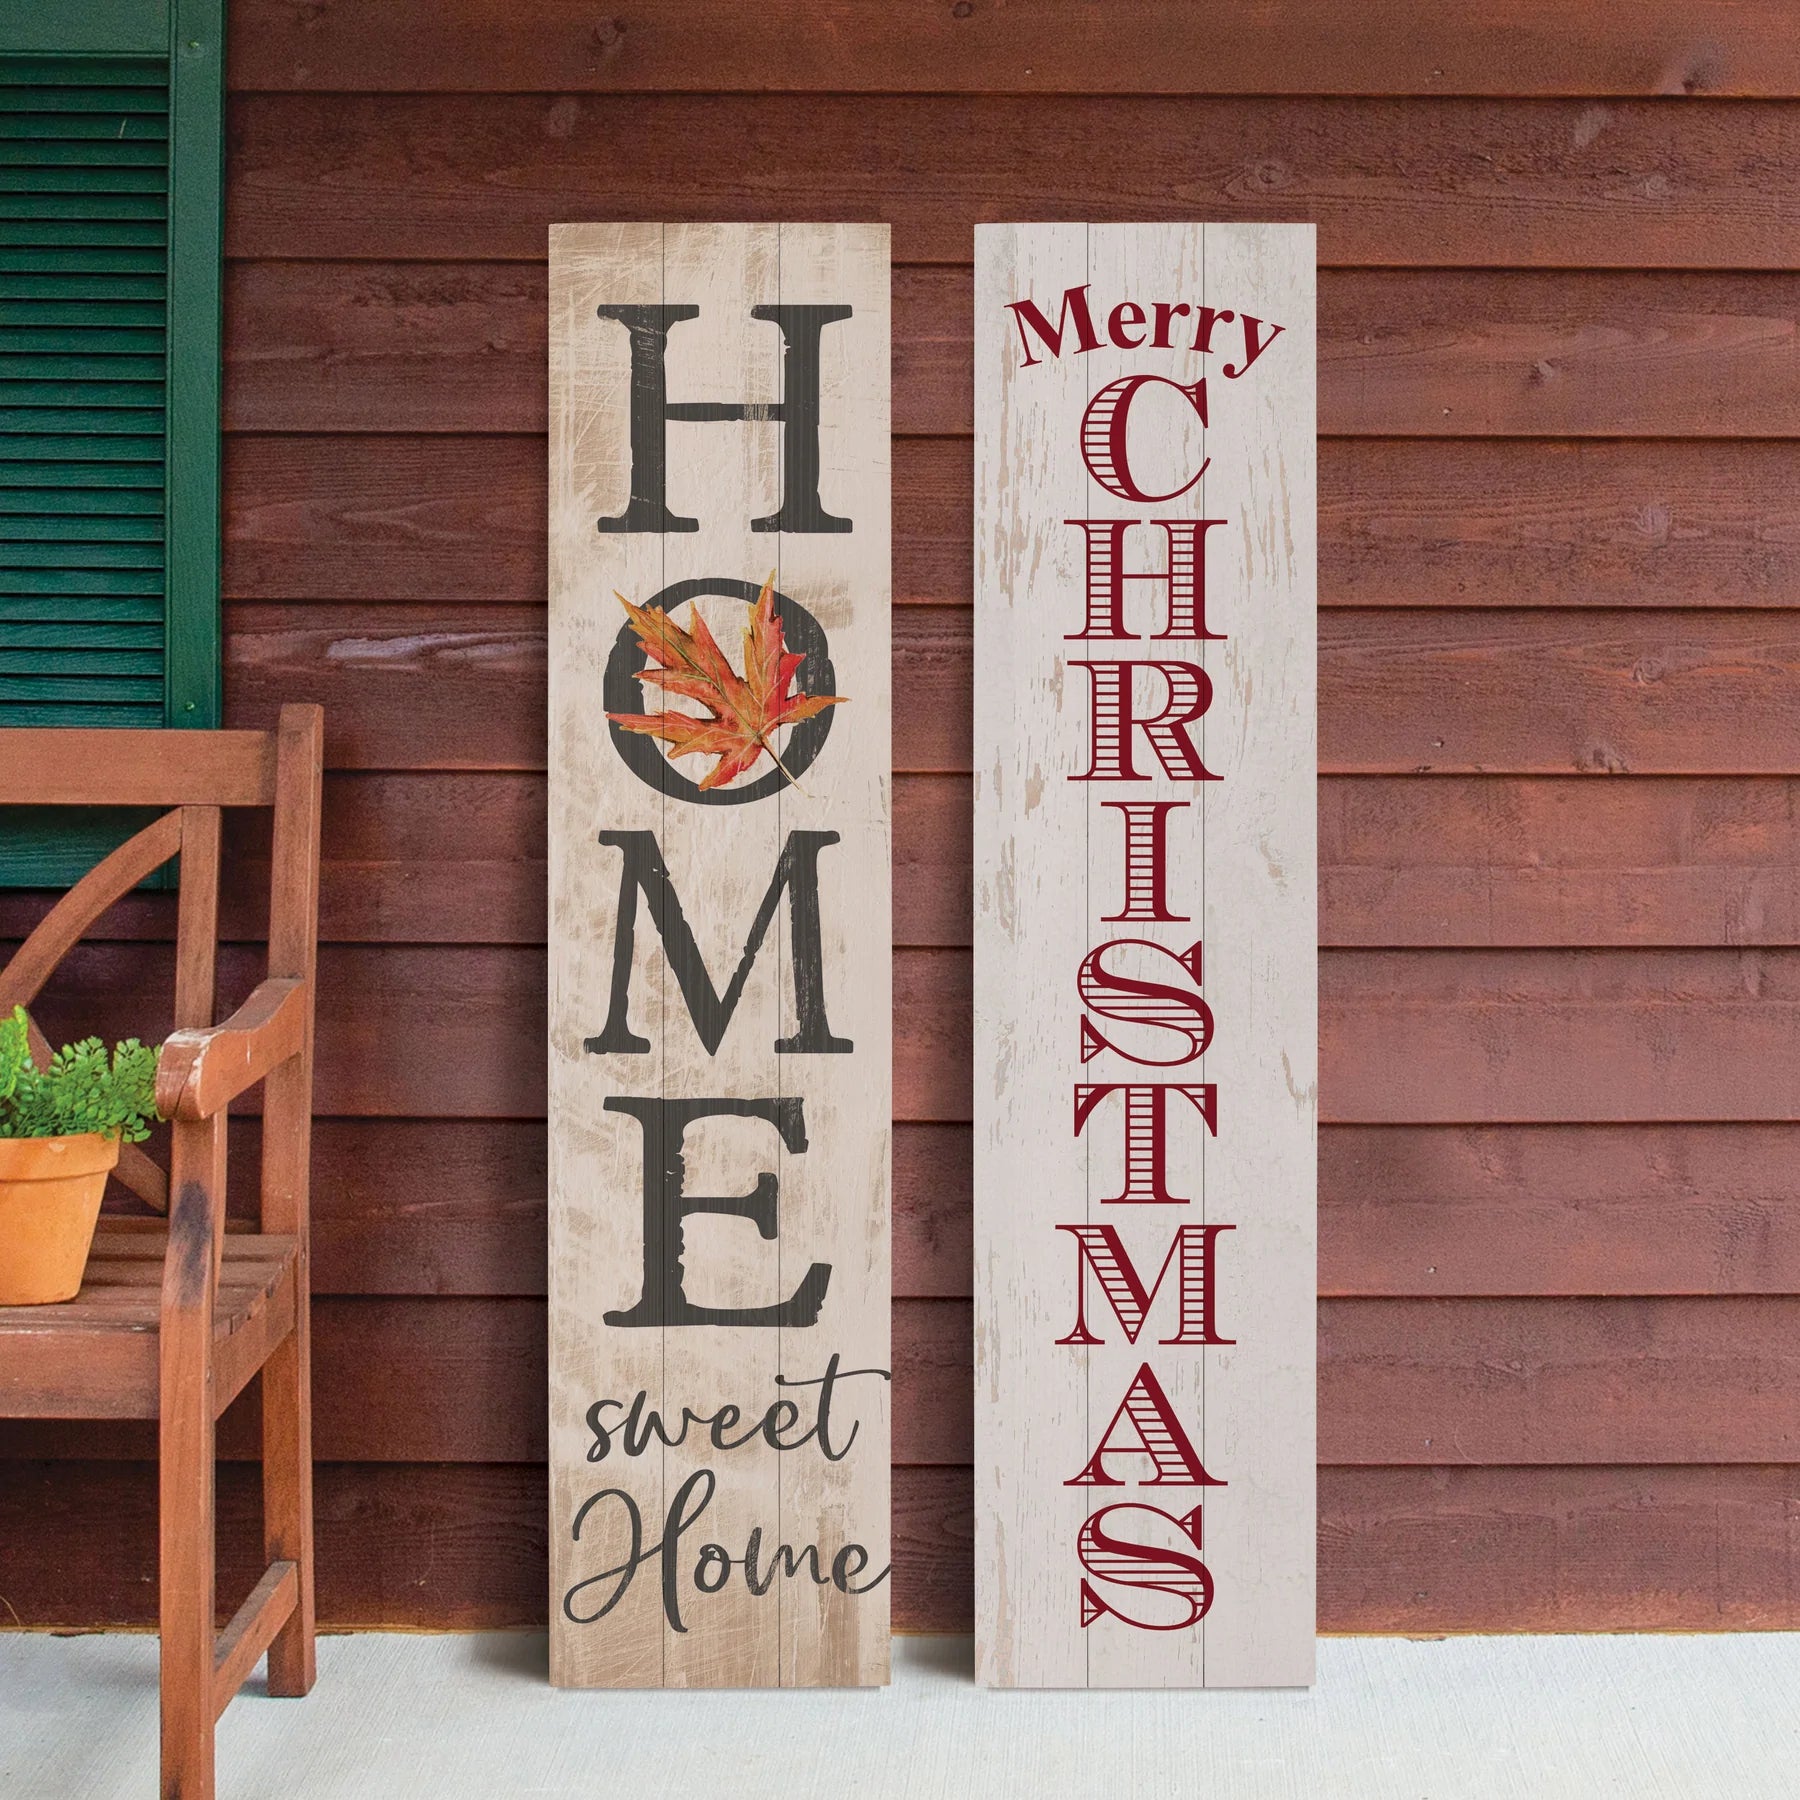 MERRY CHRISTMAS DOUBLE-SIDED OUTDOOR PORCH SIGN